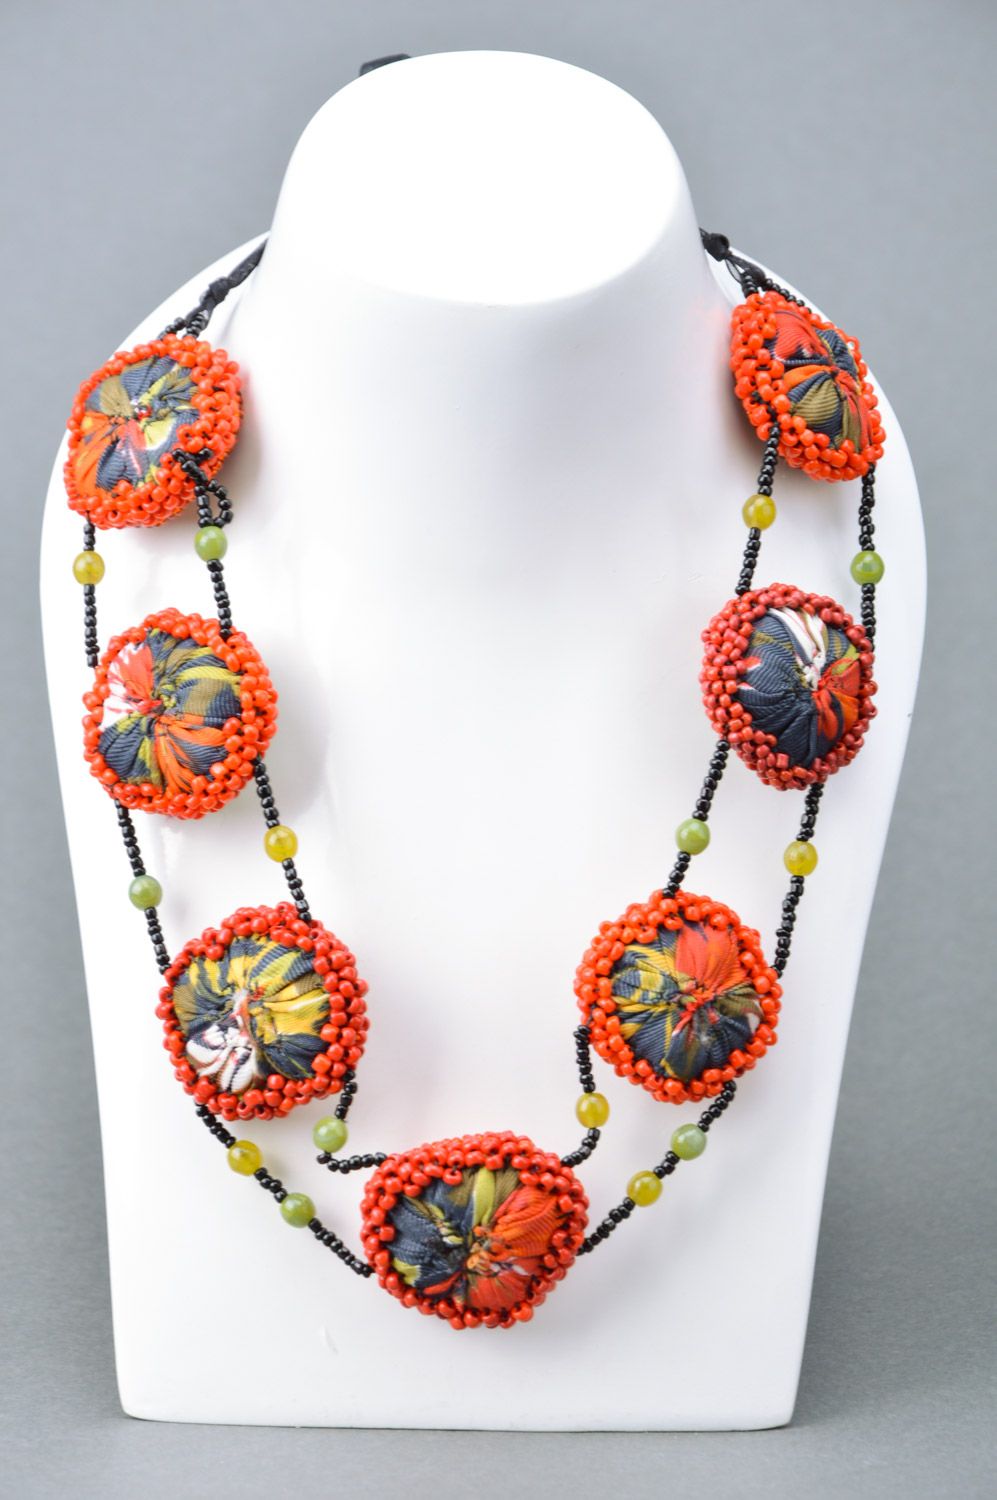 Unusual handmade massive women's necklace woven of beads and fabric photo 1